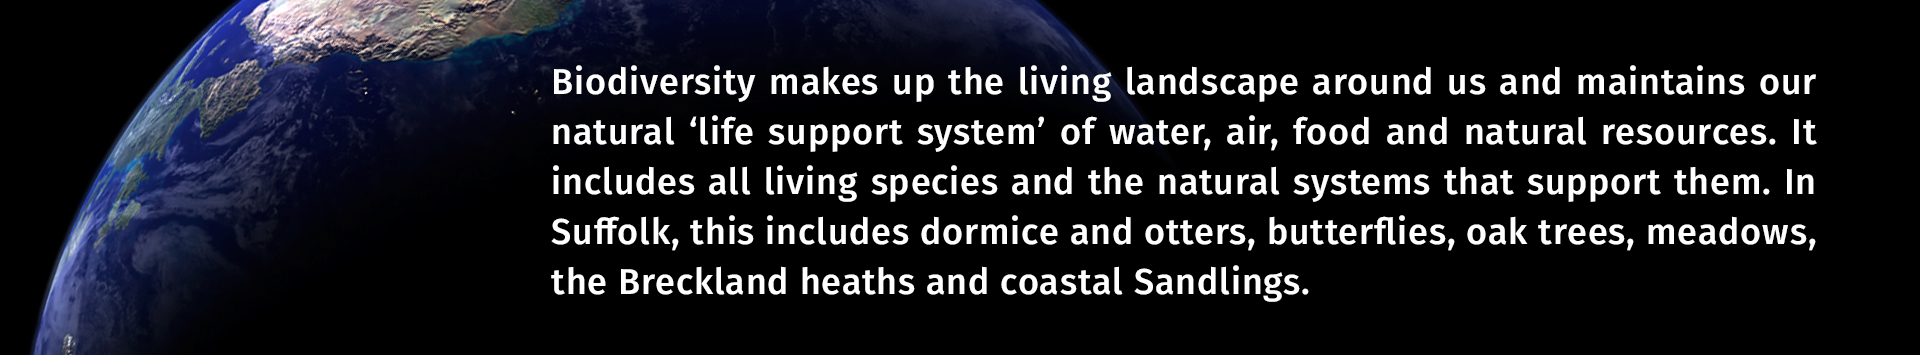 Satellite view of earth with this text over, Biodiversity makes up the living landscape around us and maintains our natural ‘life support system’ of water, air, food and natural resources. It includes all living species and the natural systems that support them. In Suffolk, this includes dormice and otters, butterflies, oak trees, meadows, the Breckland heaths and coastal Sandlings. READ MORE... 